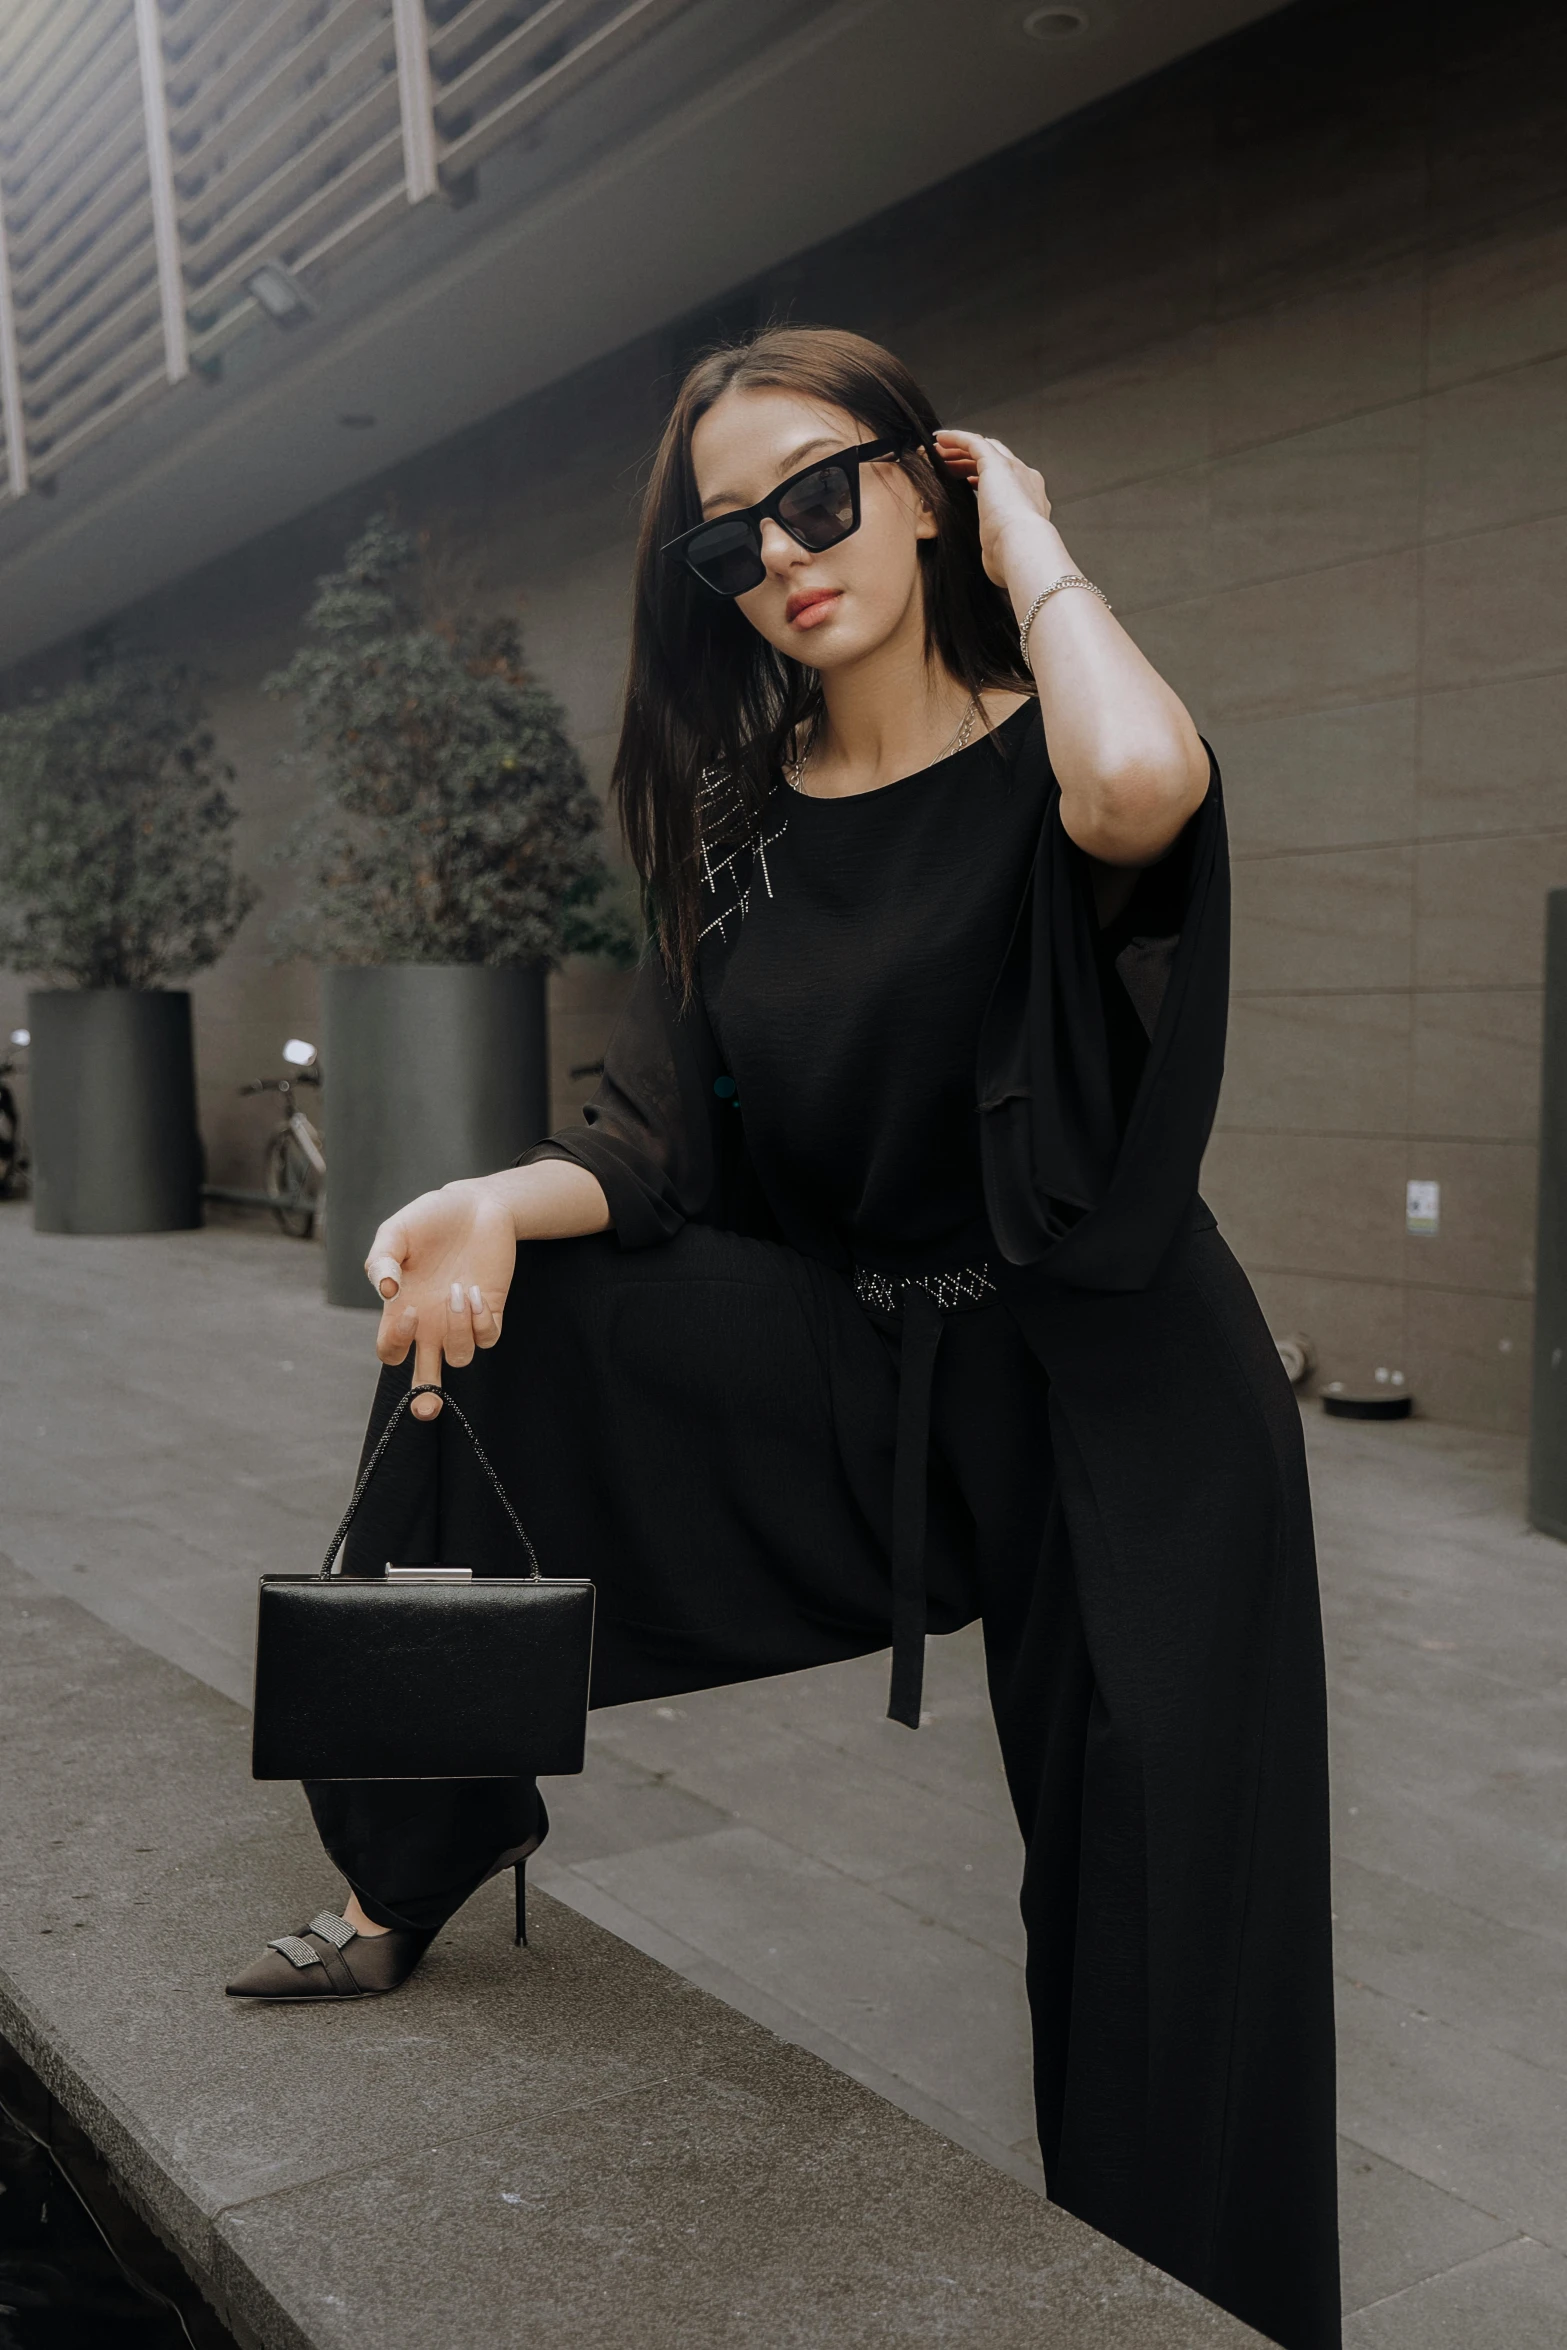 woman sitting on ledge in front of building wearing black outfit and sunglasses